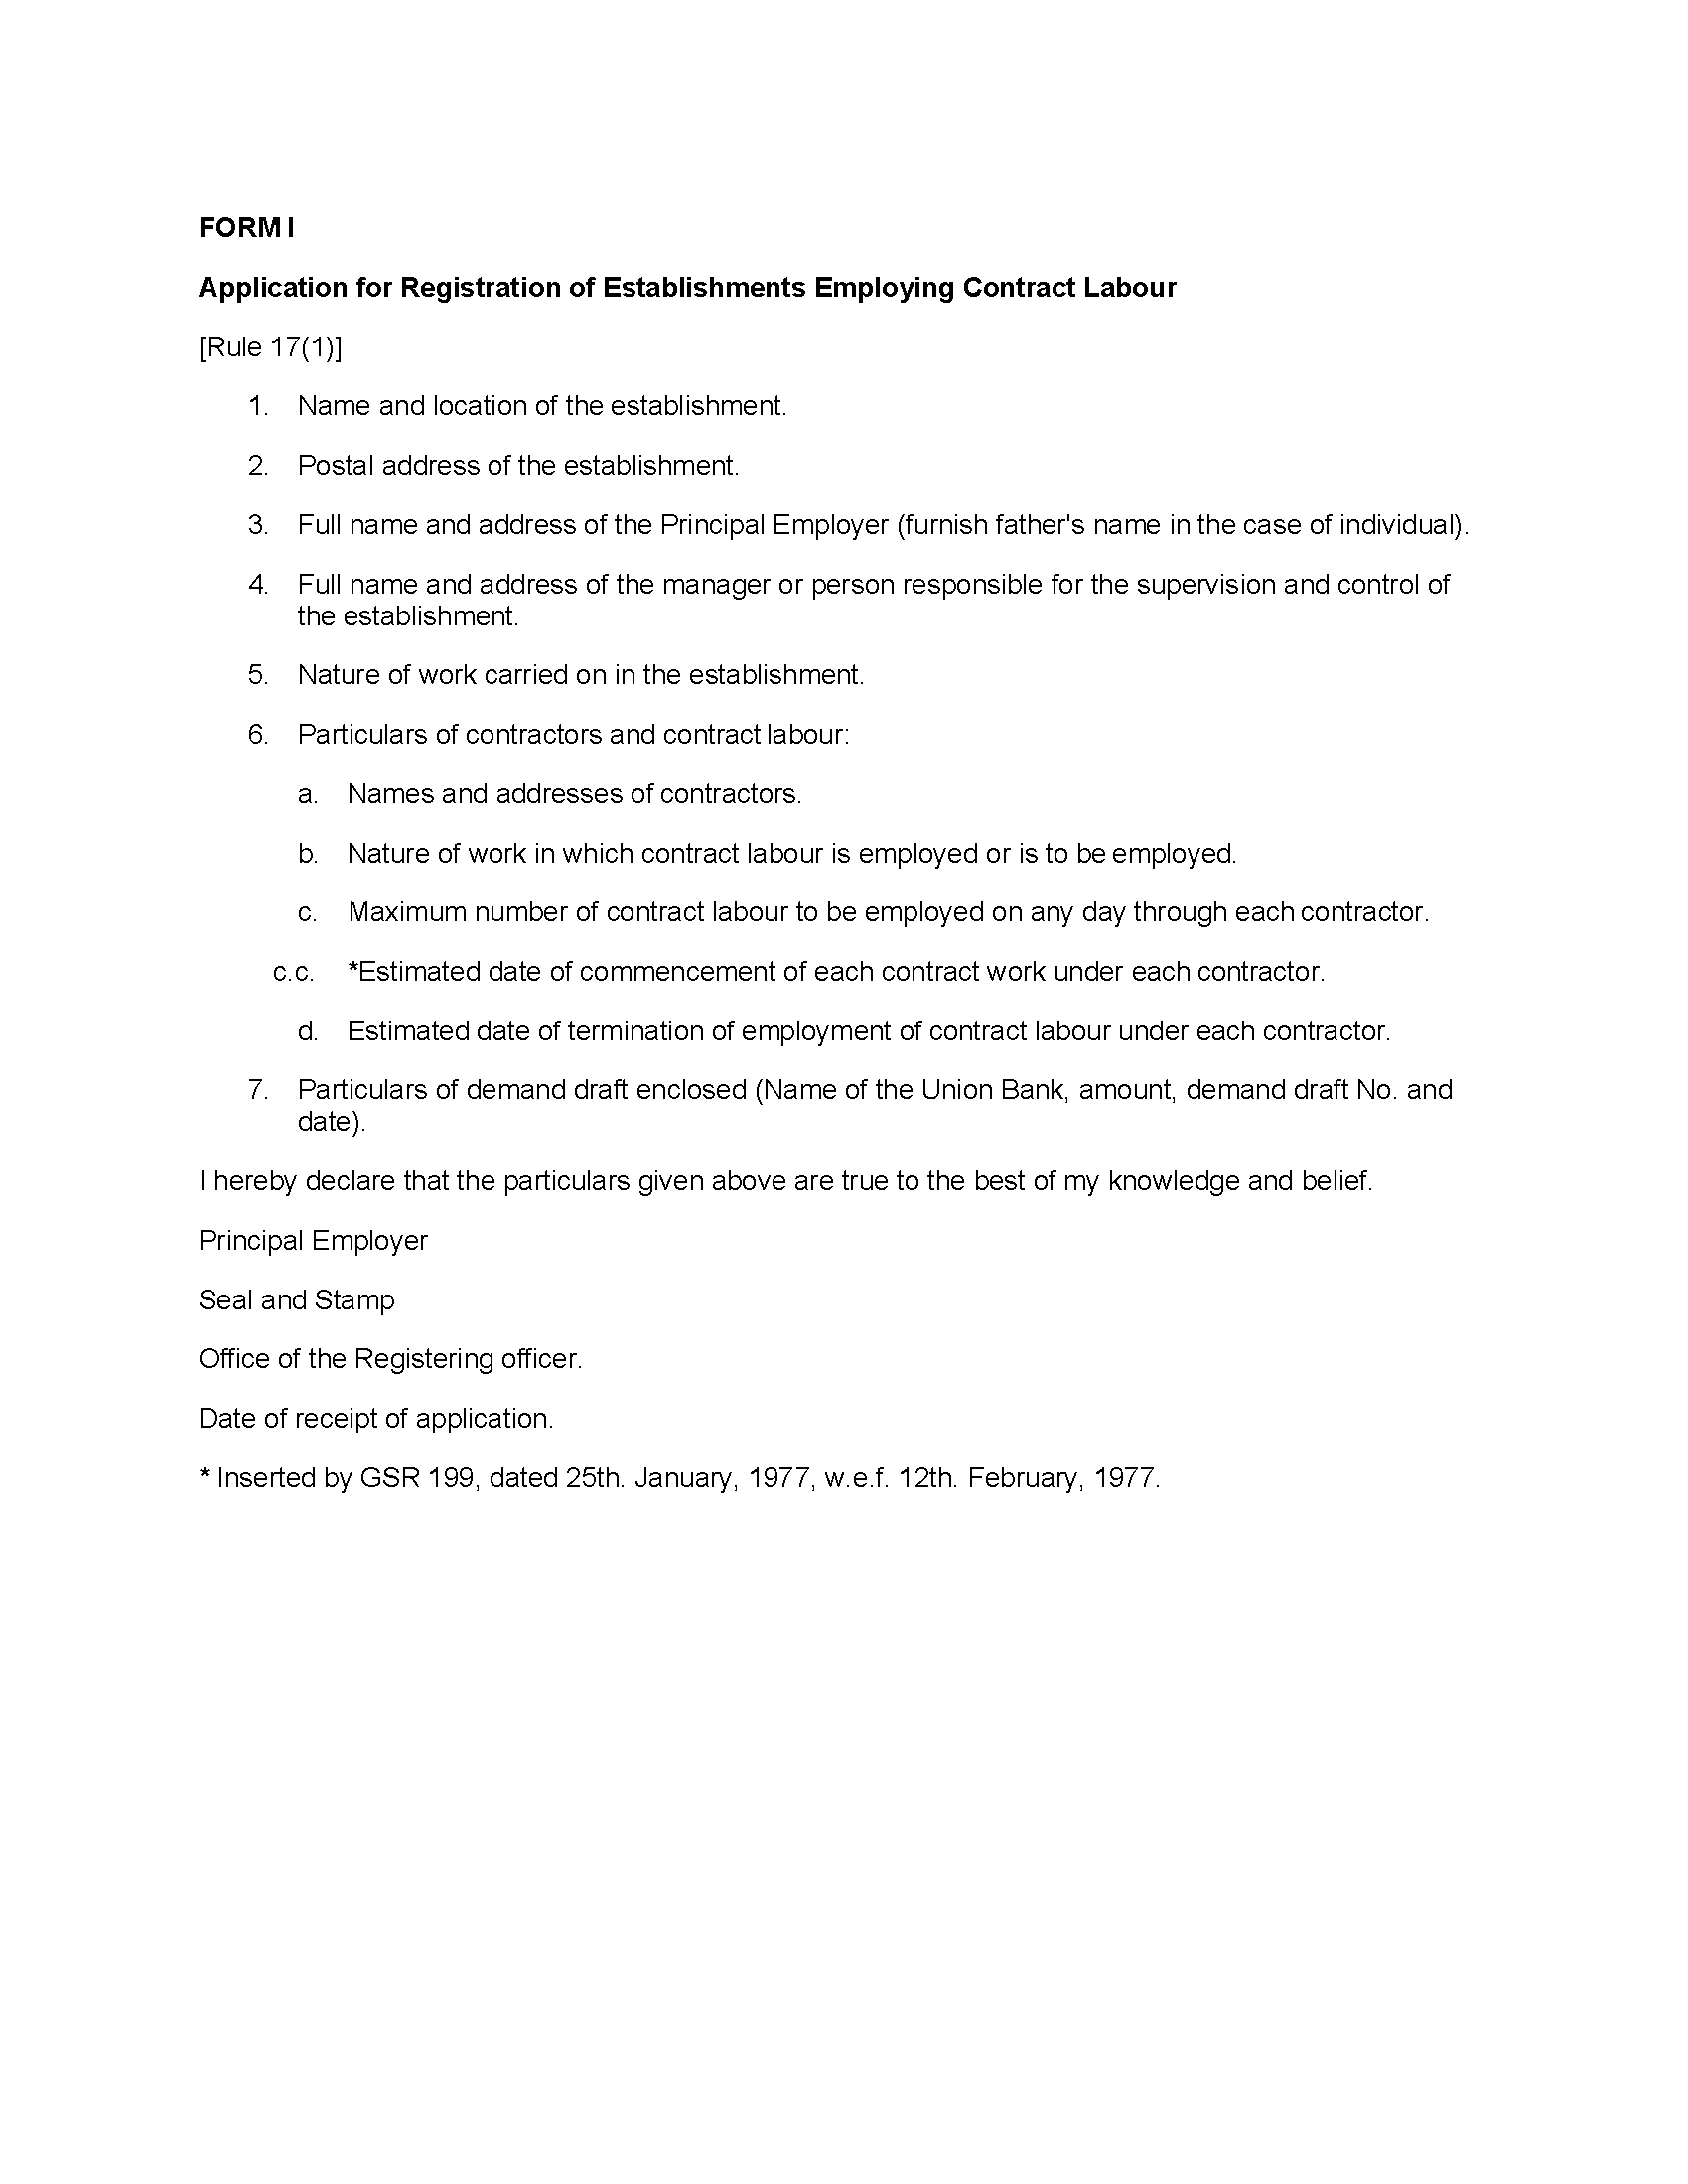 48 - FORM I - Application for Registration of Establishments employing Contract Labour-converted